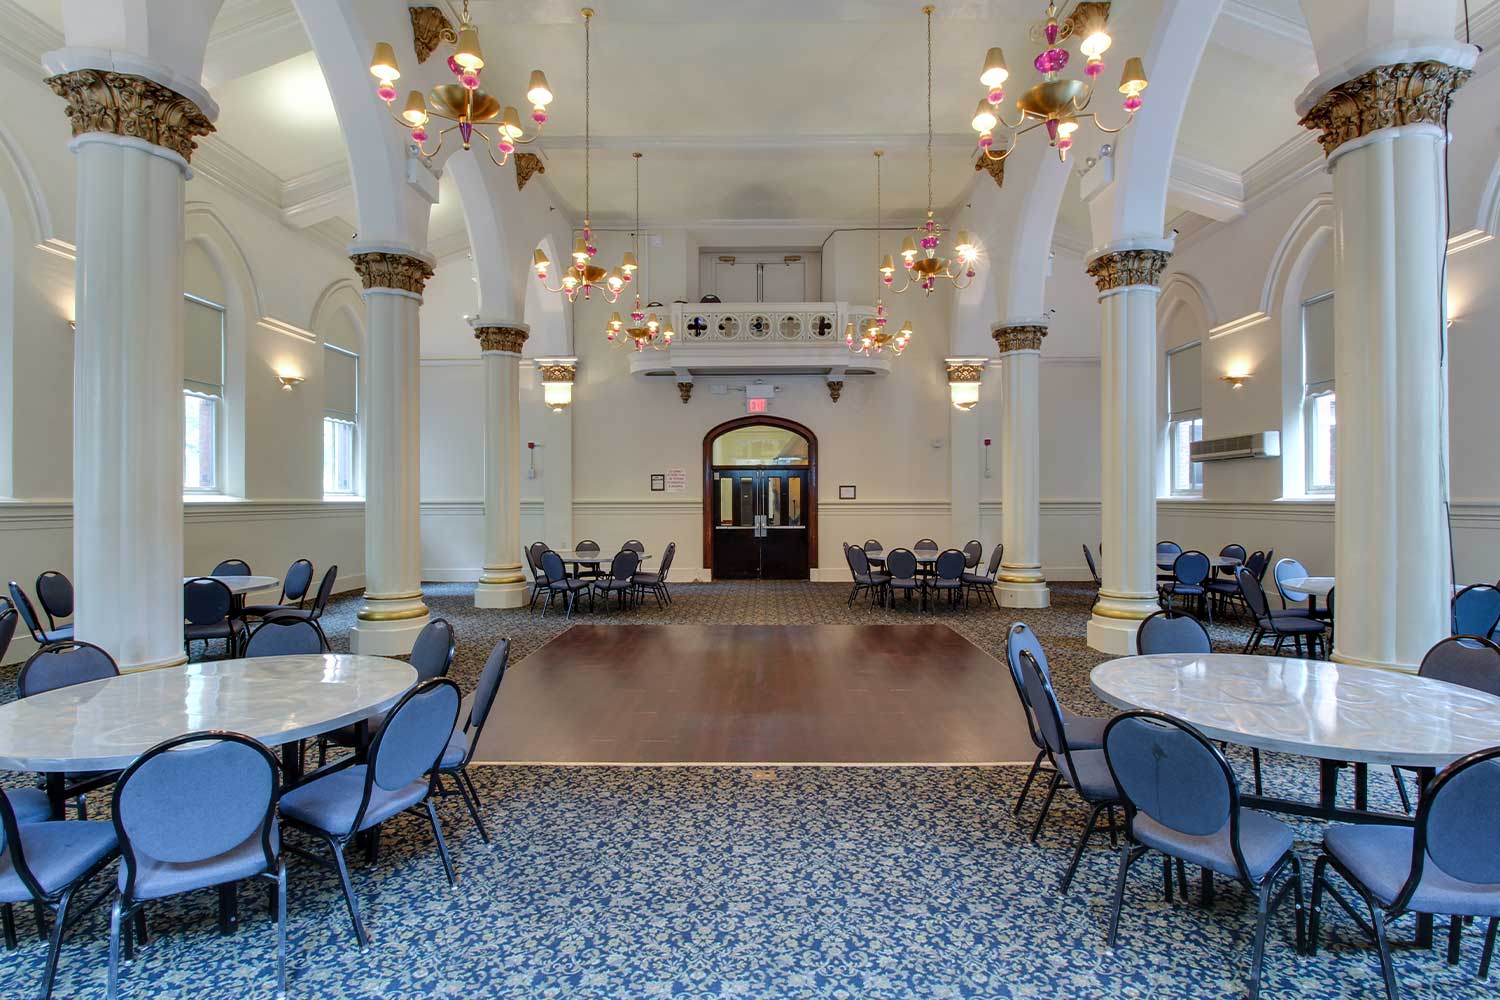 the ballroom at HI New York City hostel is a large event space available for meetings and other events that groups can book during their stay.